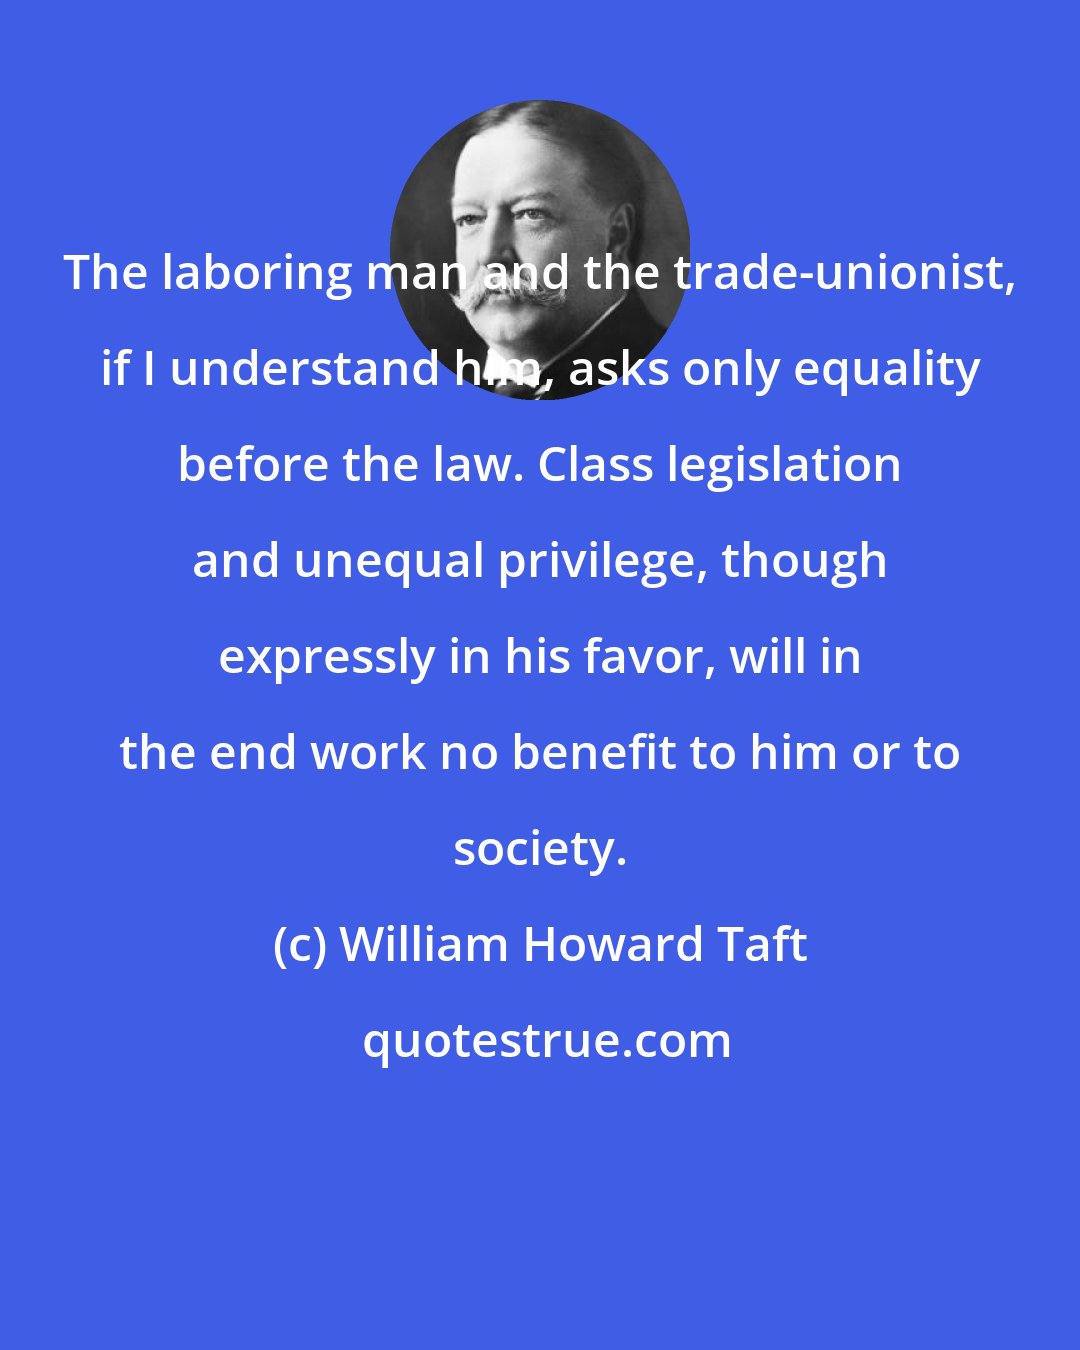 William Howard Taft: The laboring man and the trade-unionist, if I understand him, asks only equality before the law. Class legislation and unequal privilege, though expressly in his favor, will in the end work no benefit to him or to society.